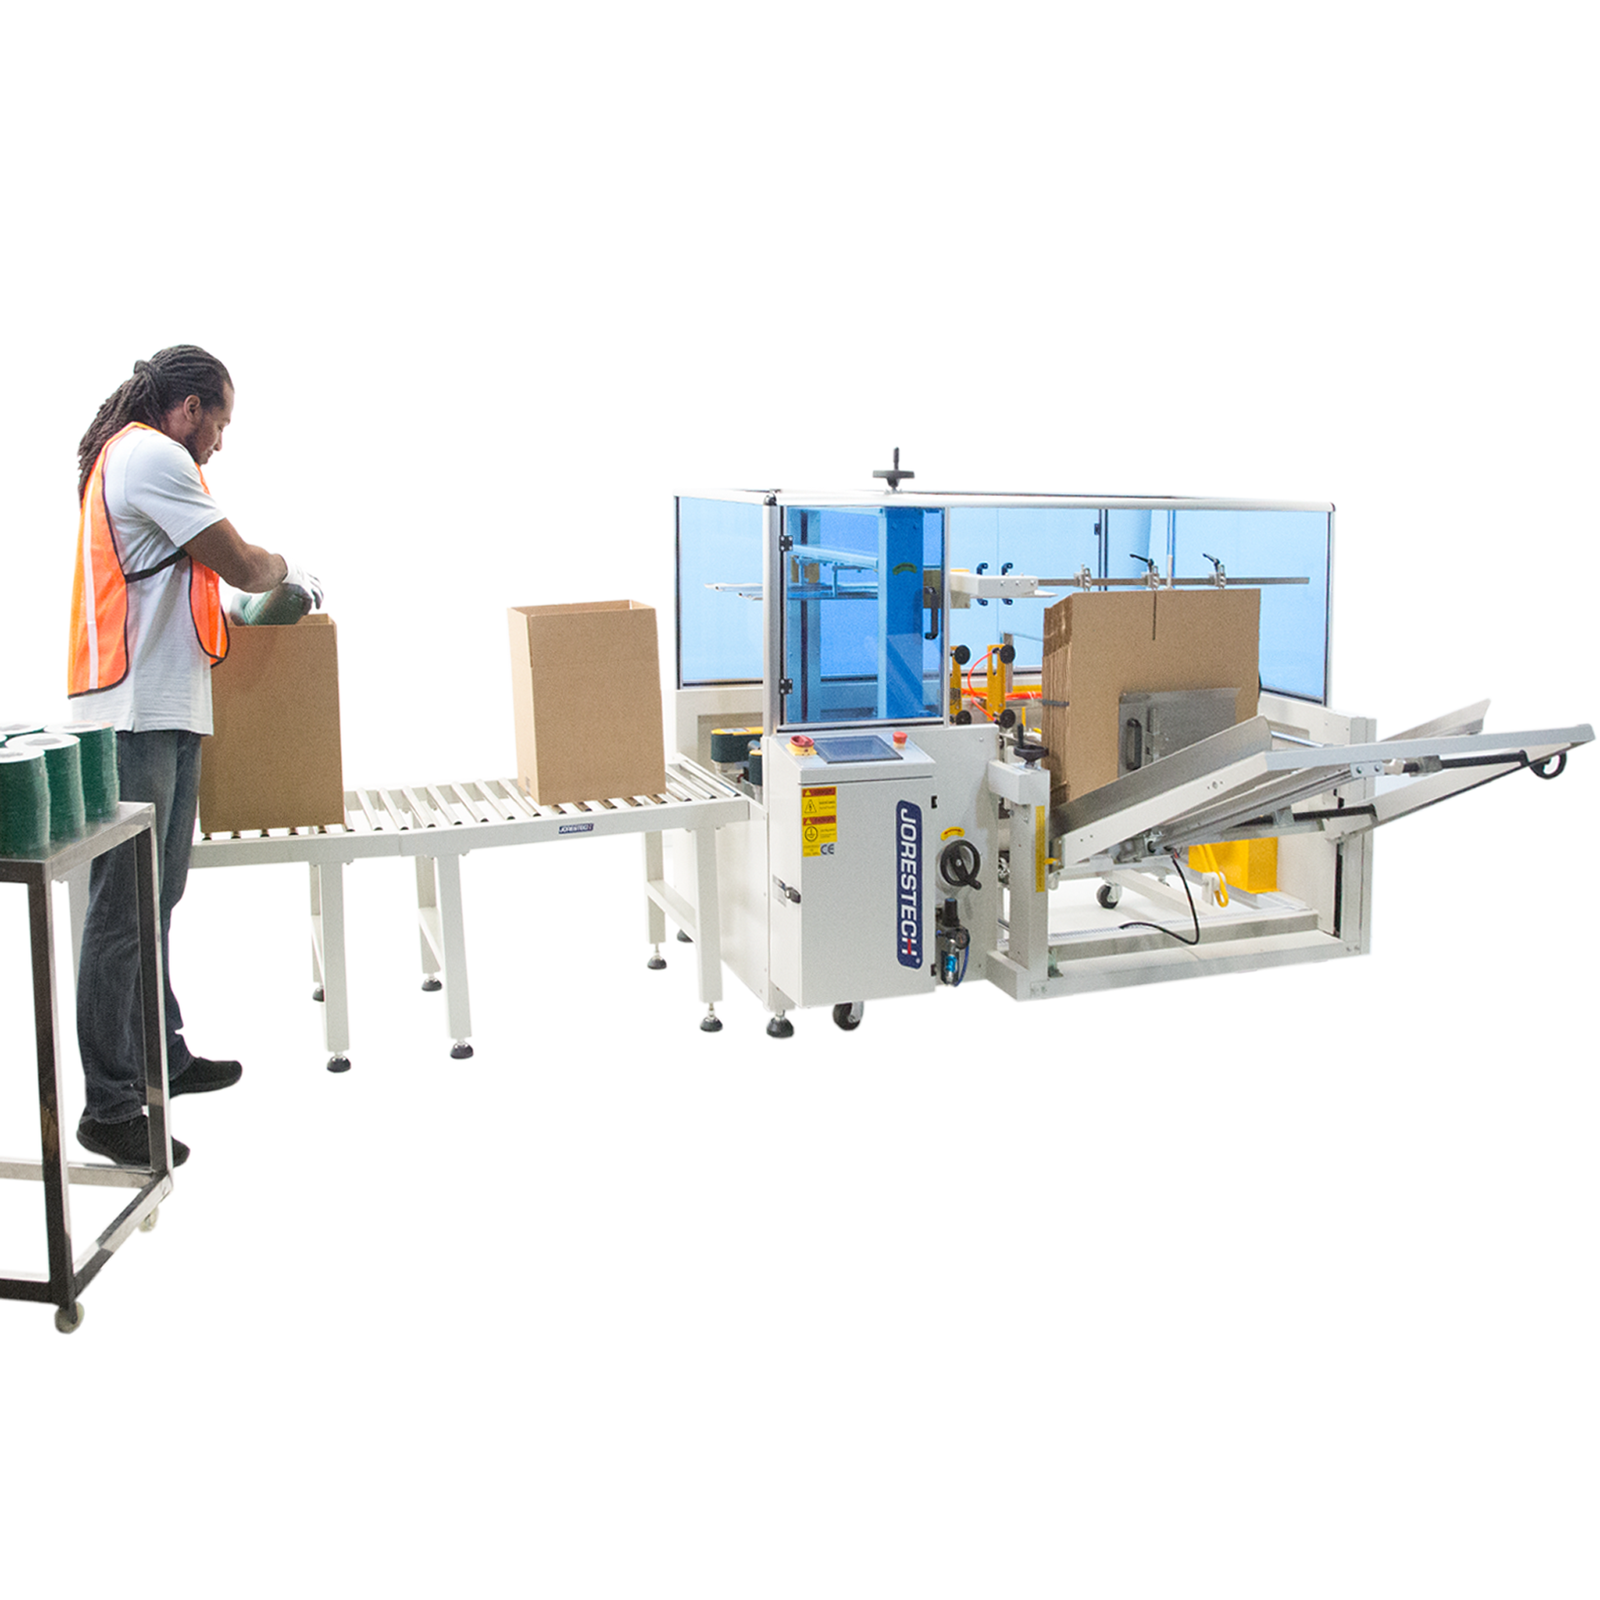 white automatic case erector with blue panels filled with brown unformed boxes and man wearing orange vest inserting green items into formed boxes coming from case erector.